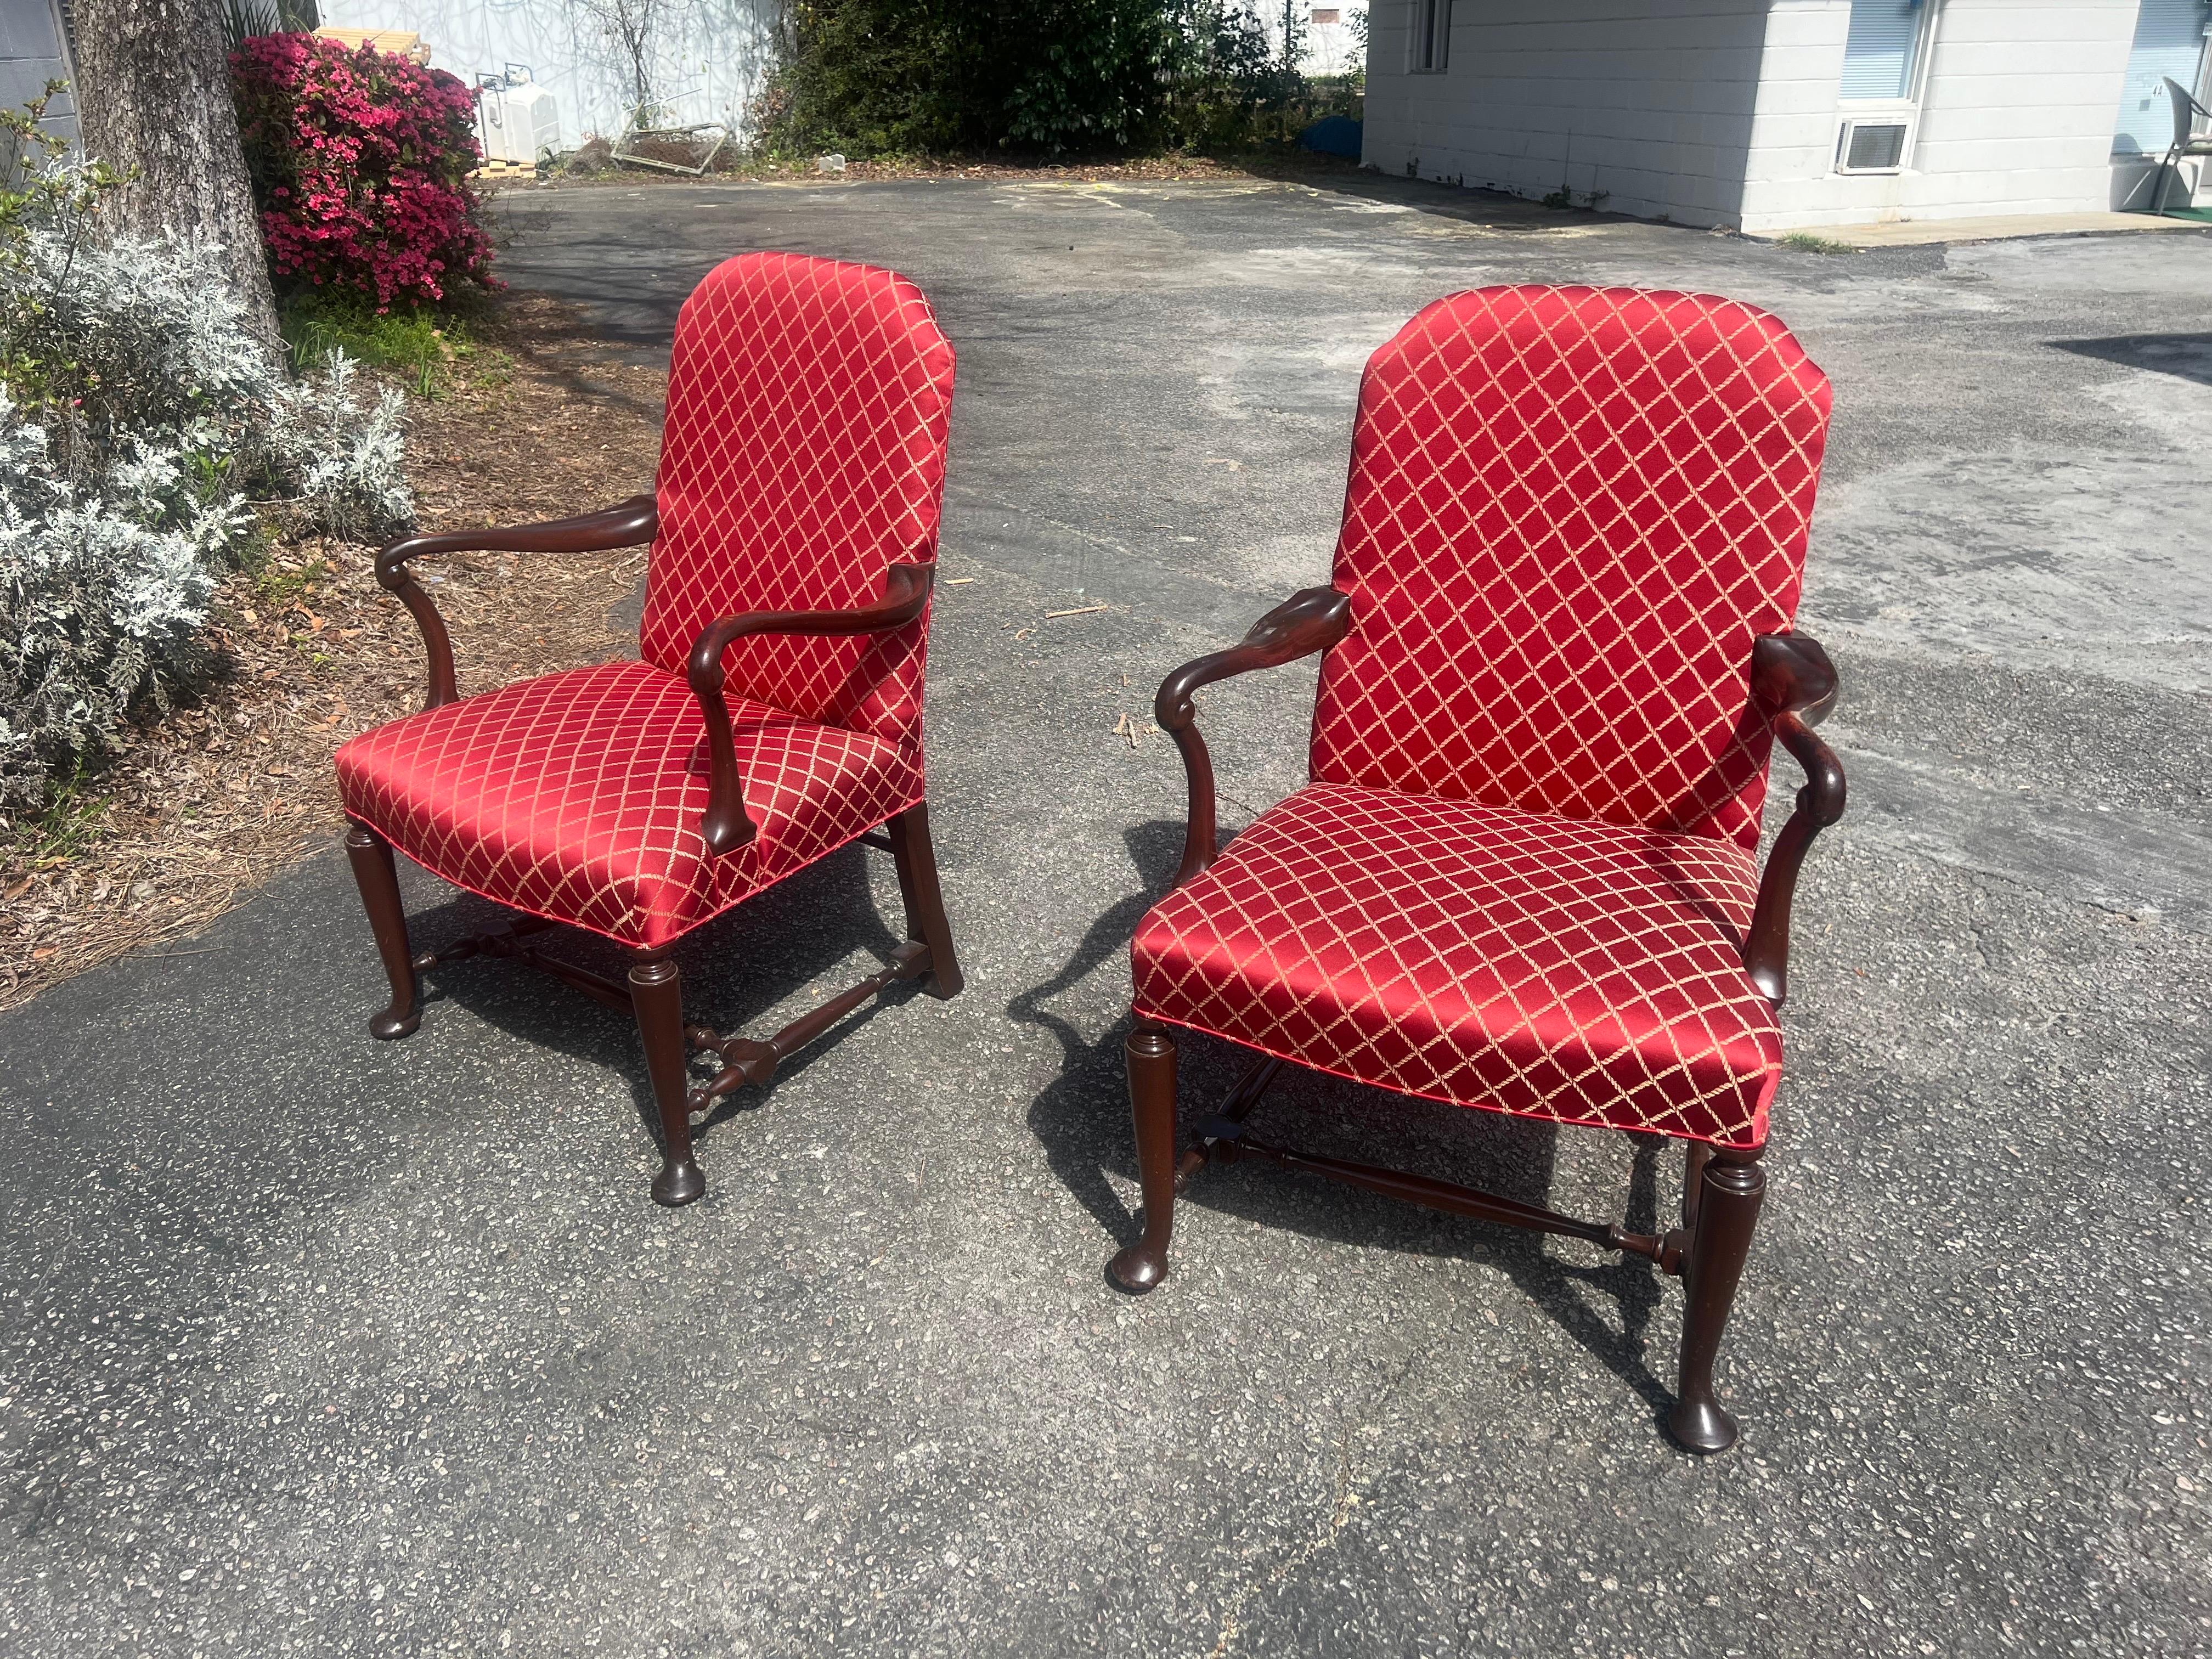 Humped back, upholstered to the back and seat in red fabric with a lozenge design, the arms of scrolling form, the legs joined by stretchers. In excellent condition commensurate of age.